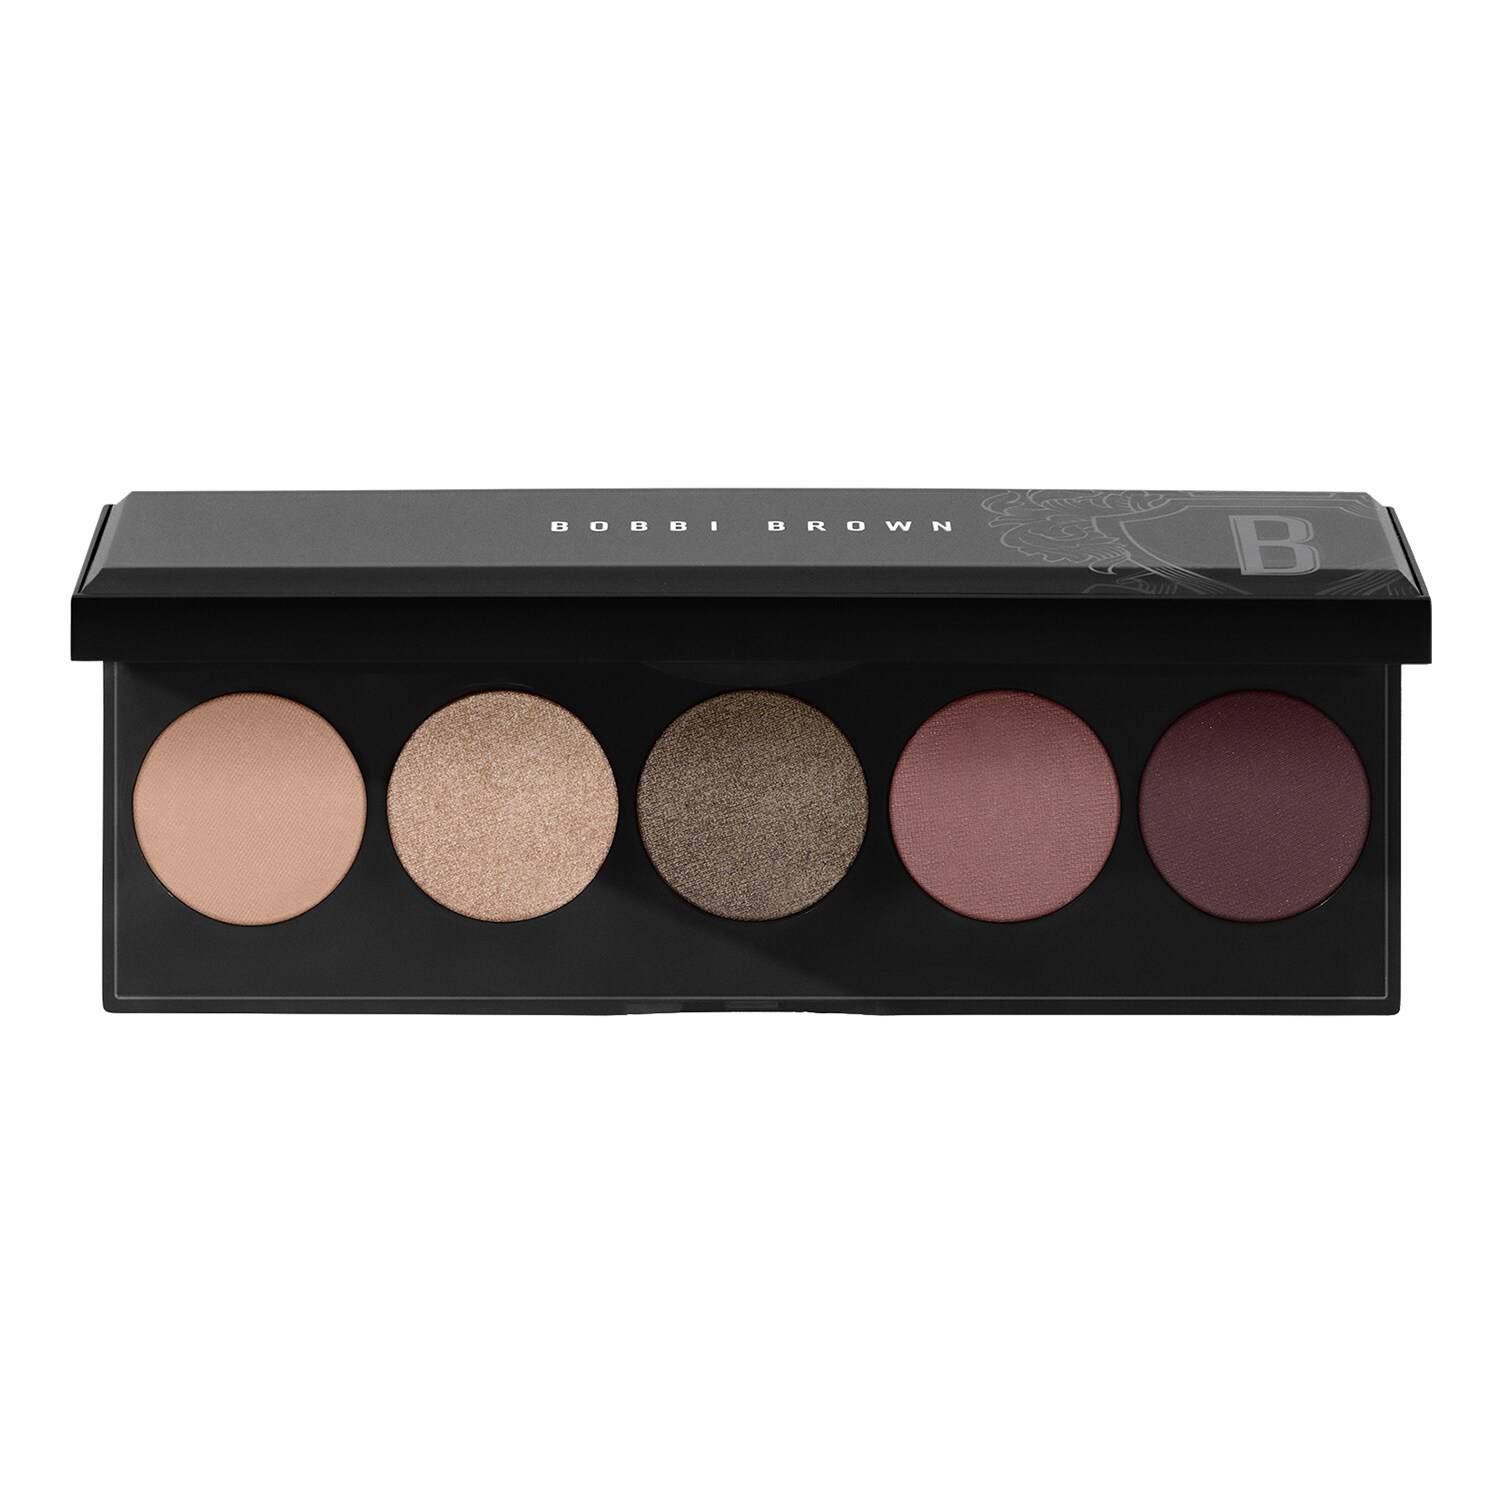 Bobbi Brown All Nudes Eye Shadow Palette 6G Rosey Nudes